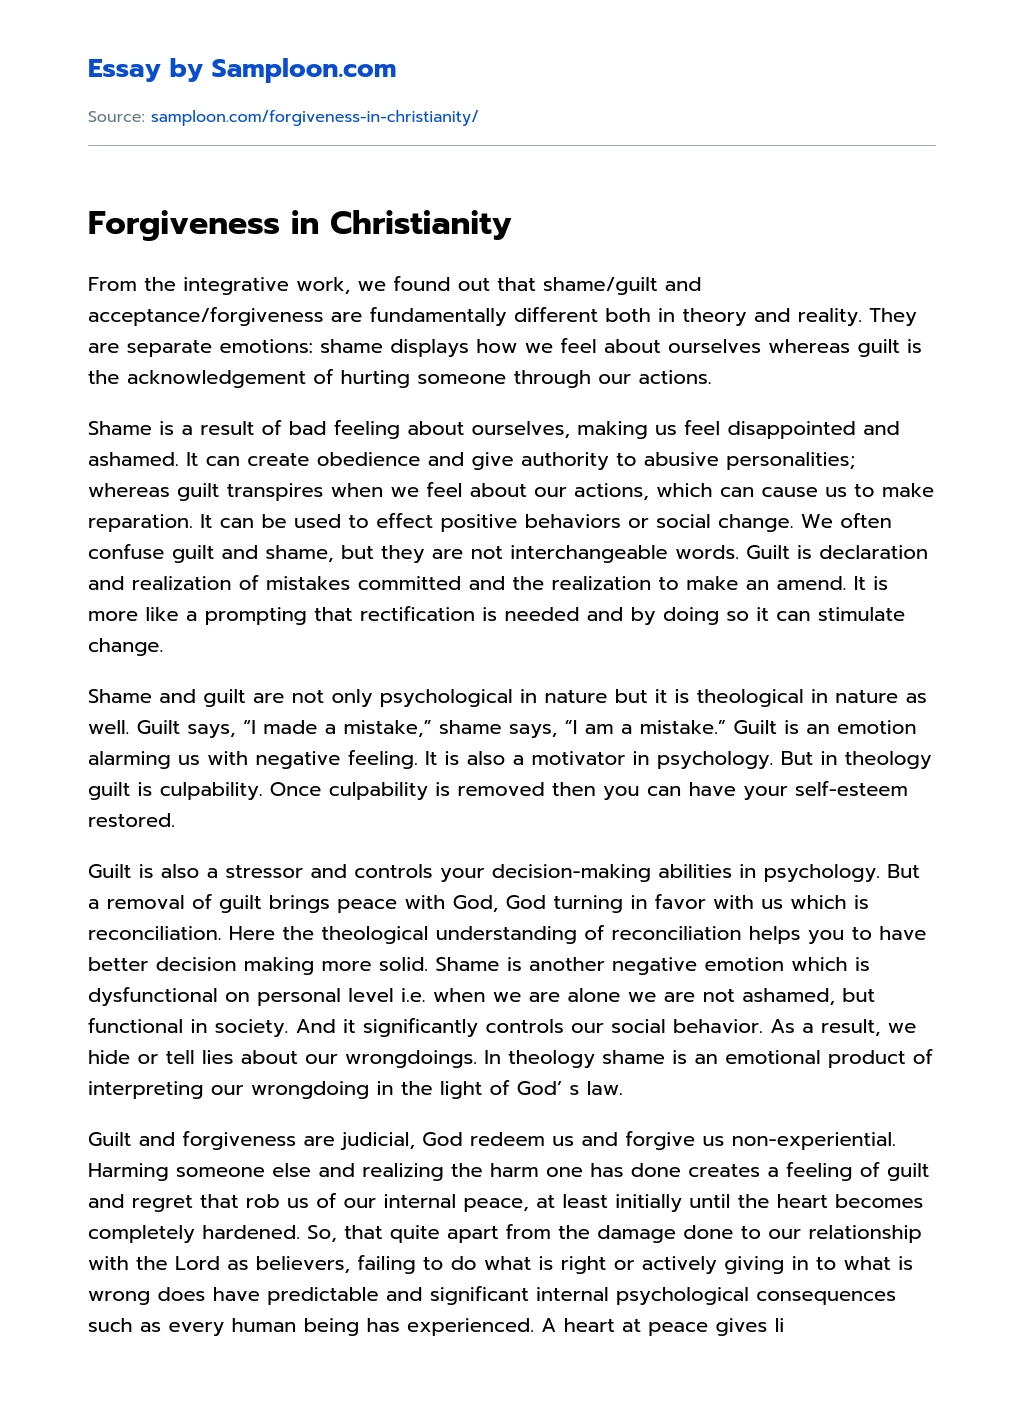 Forgiveness in Christianity Personal Essay essay